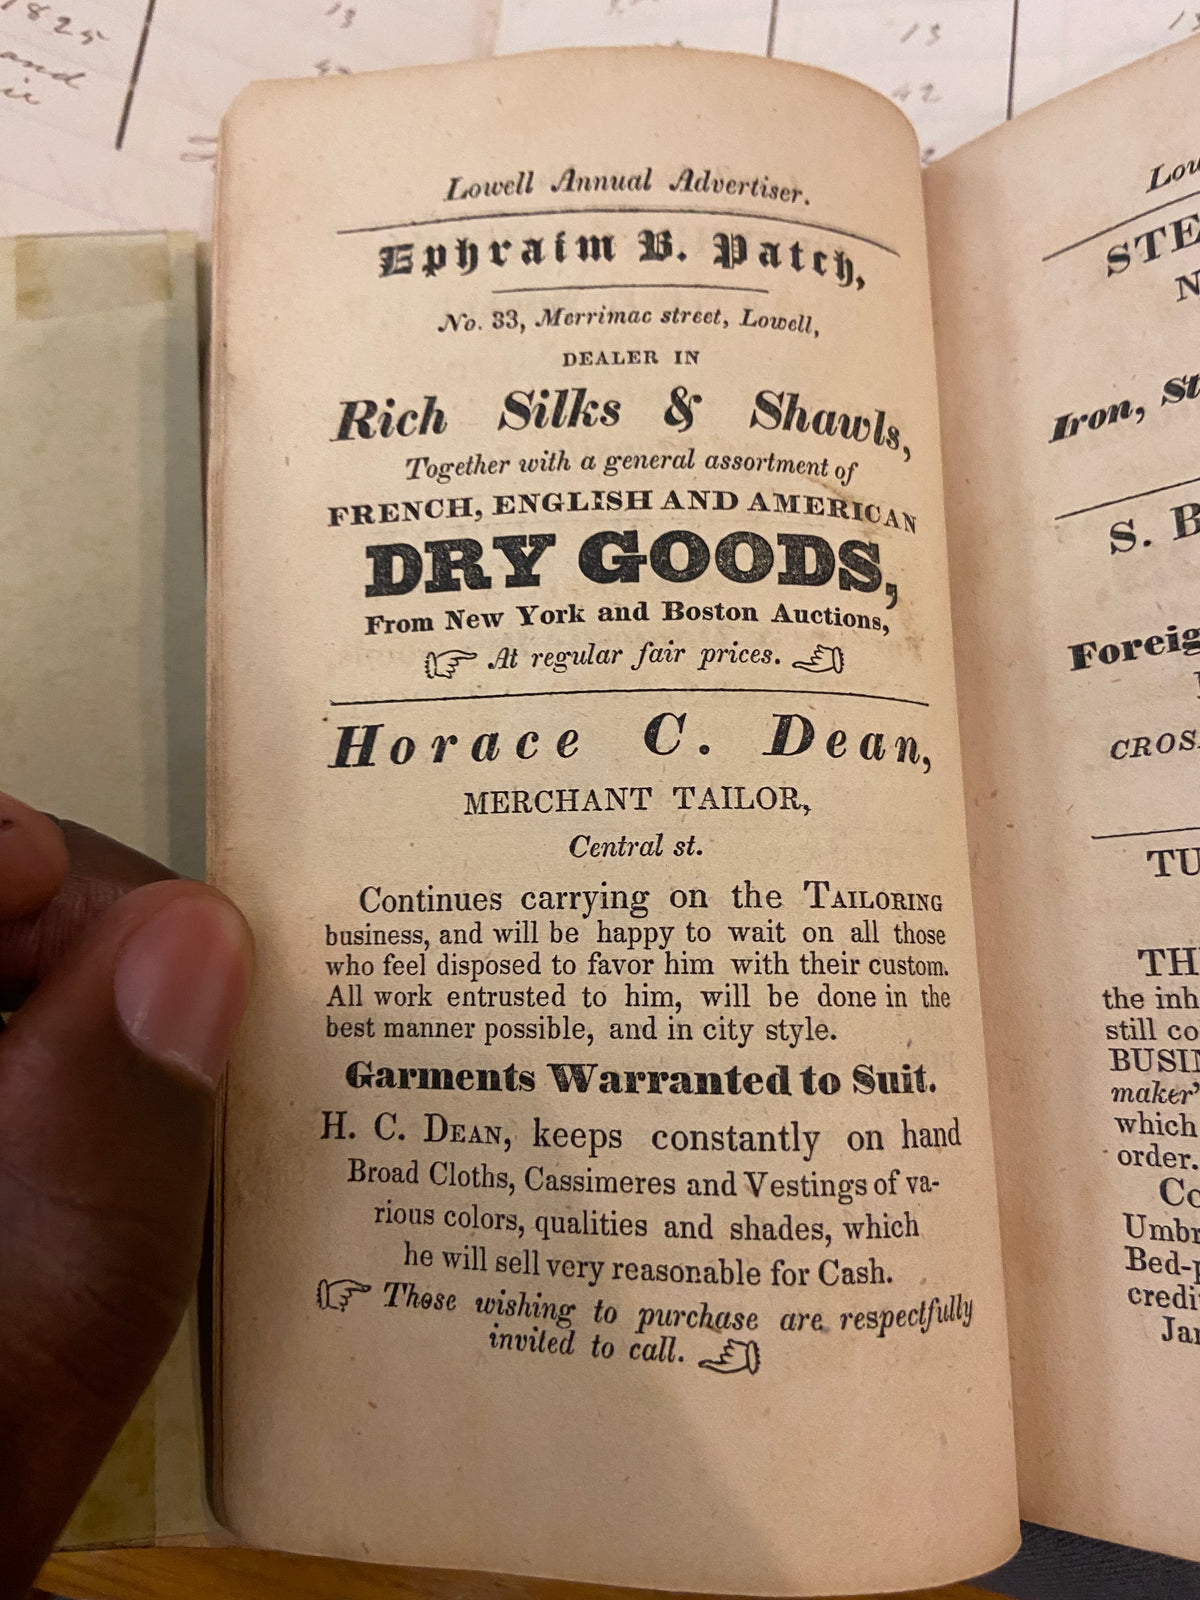 “We black folks had to wear lowells”: Negro Cloth, Enslaved People, and the Legacy of Lowell Manufacturing